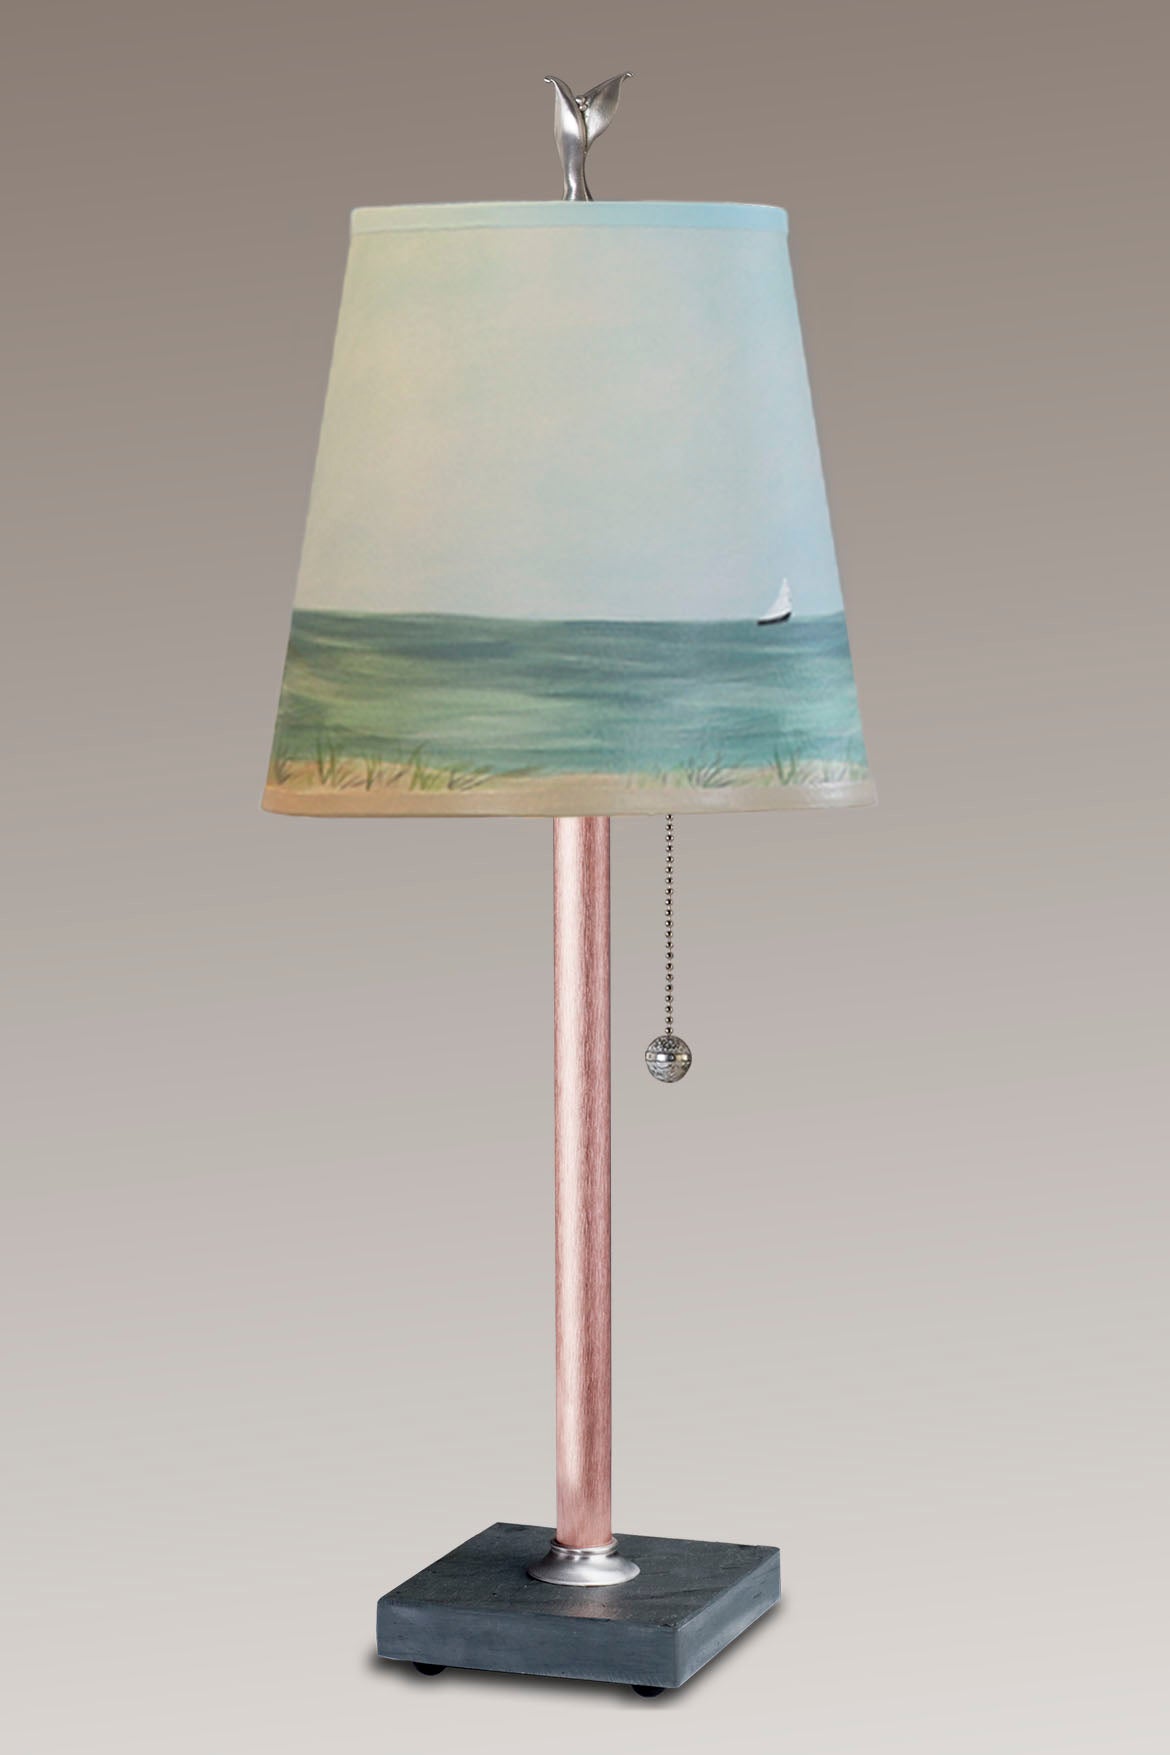 Copper Table Lamp with Small Drum Shade in Shore